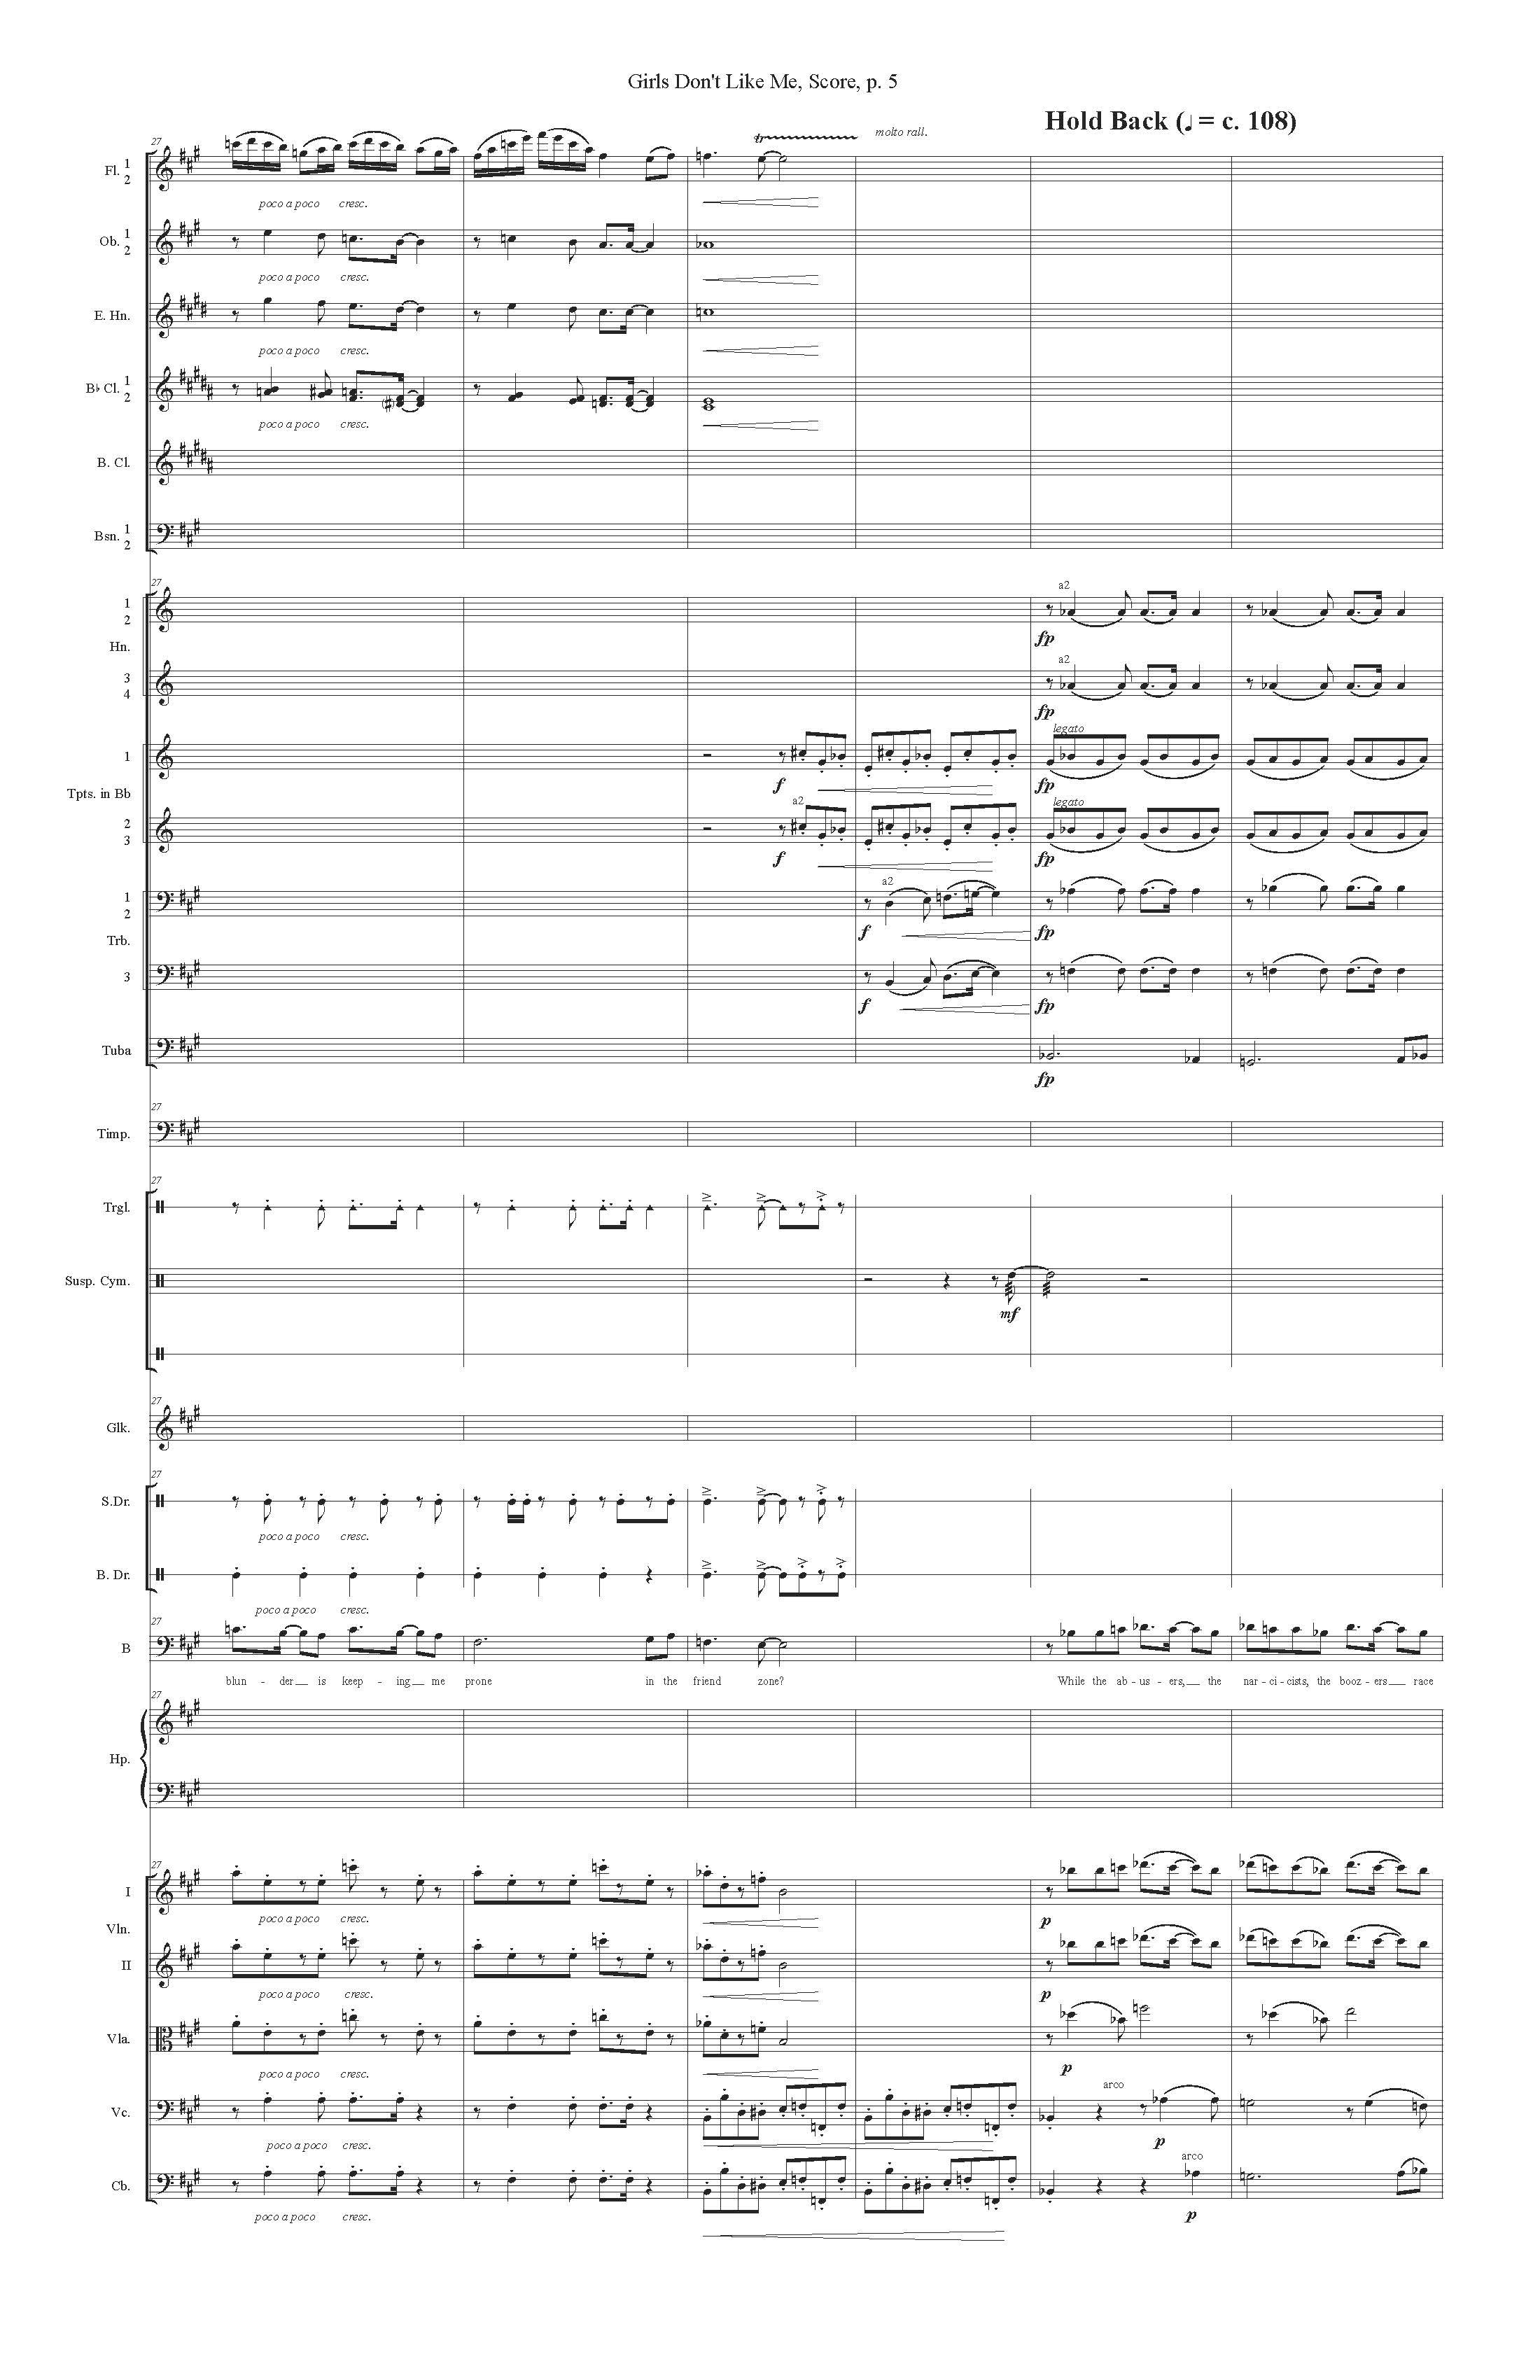 GIRLS DON'T LIKE ME ORCH - Score_Page_05.jpg